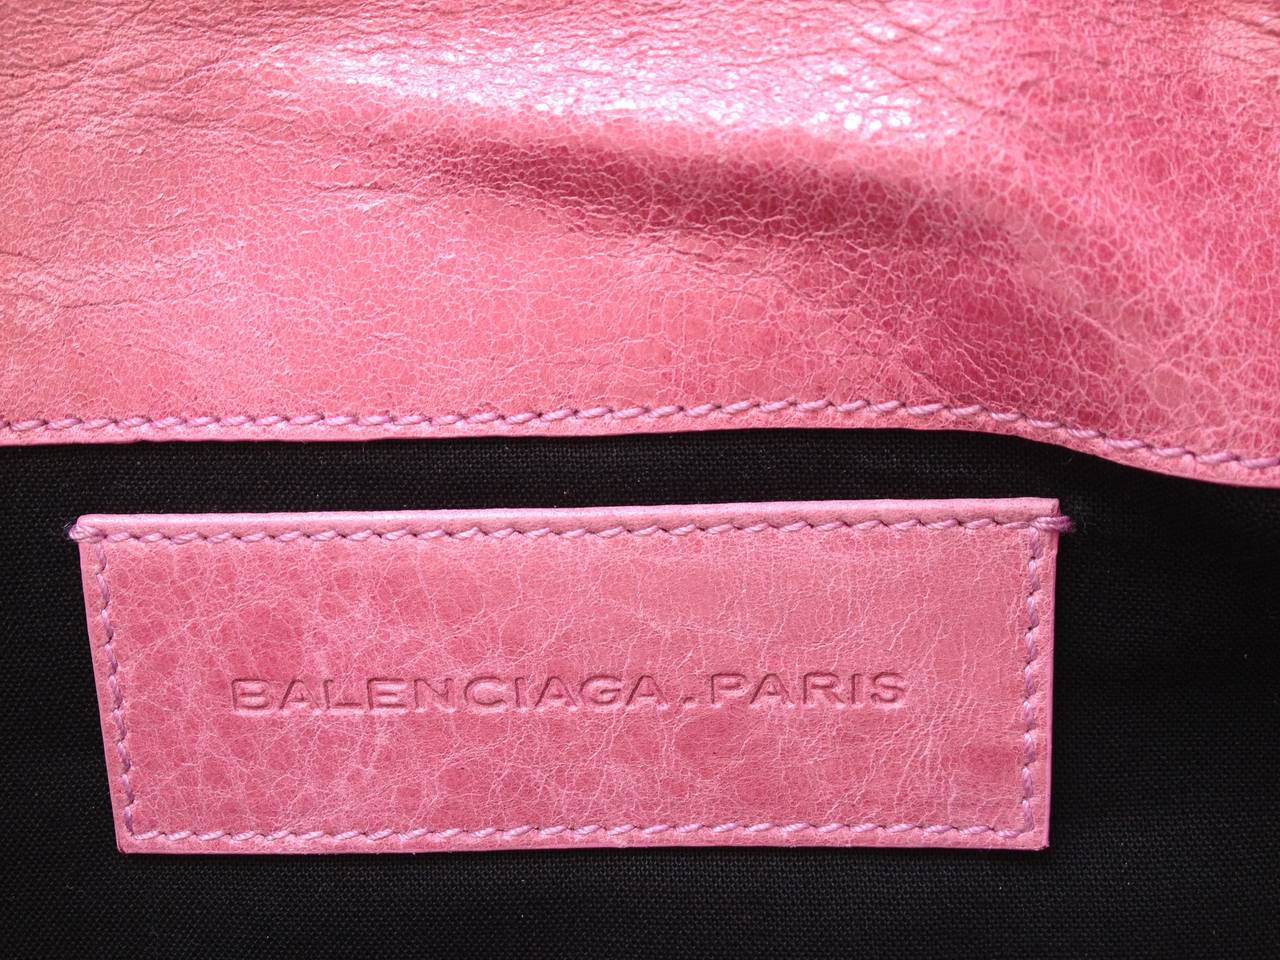 The most wonferful peony pink makes this Balenciaga so much fun! This Giant Envelope clutch features yellow gold hardware with the classic zippers and cross-hatched studs. Deceptively spacious, it  features four different pouches - one that zips